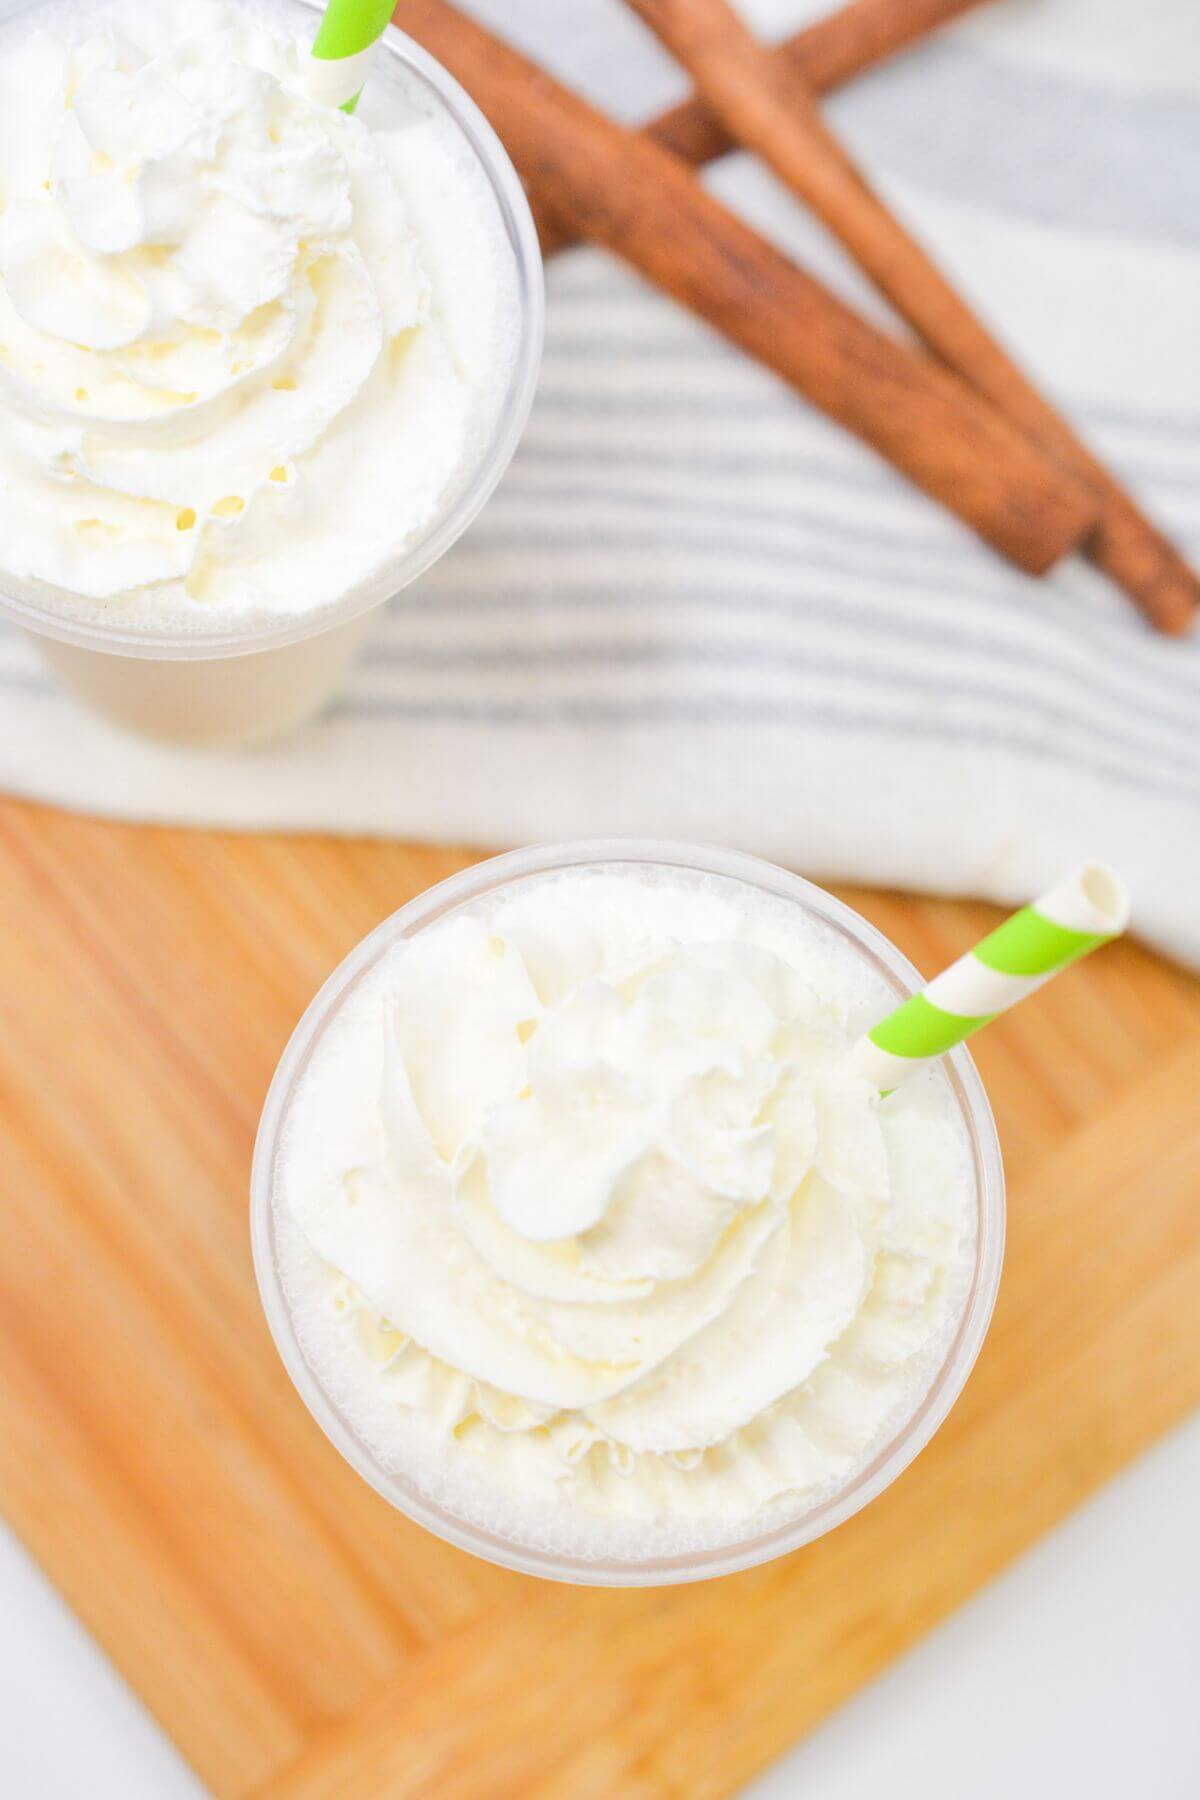 Whipped cream and straw added to the vanilla frappuccino.